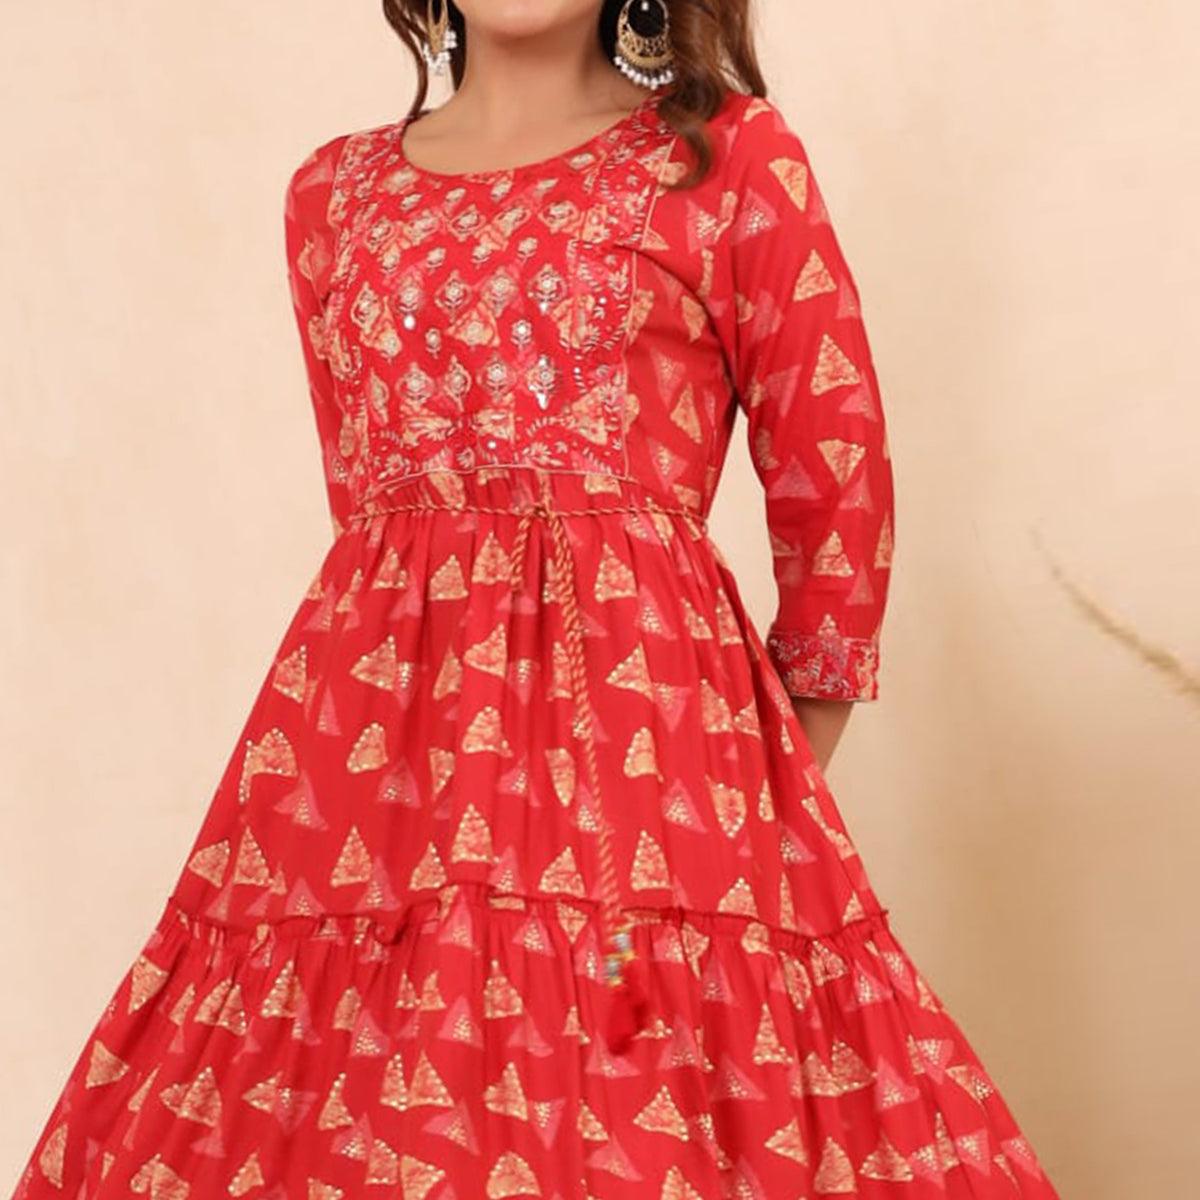 Red Printed With Sequence Embroidered Chanderi Kurti - Peachmode